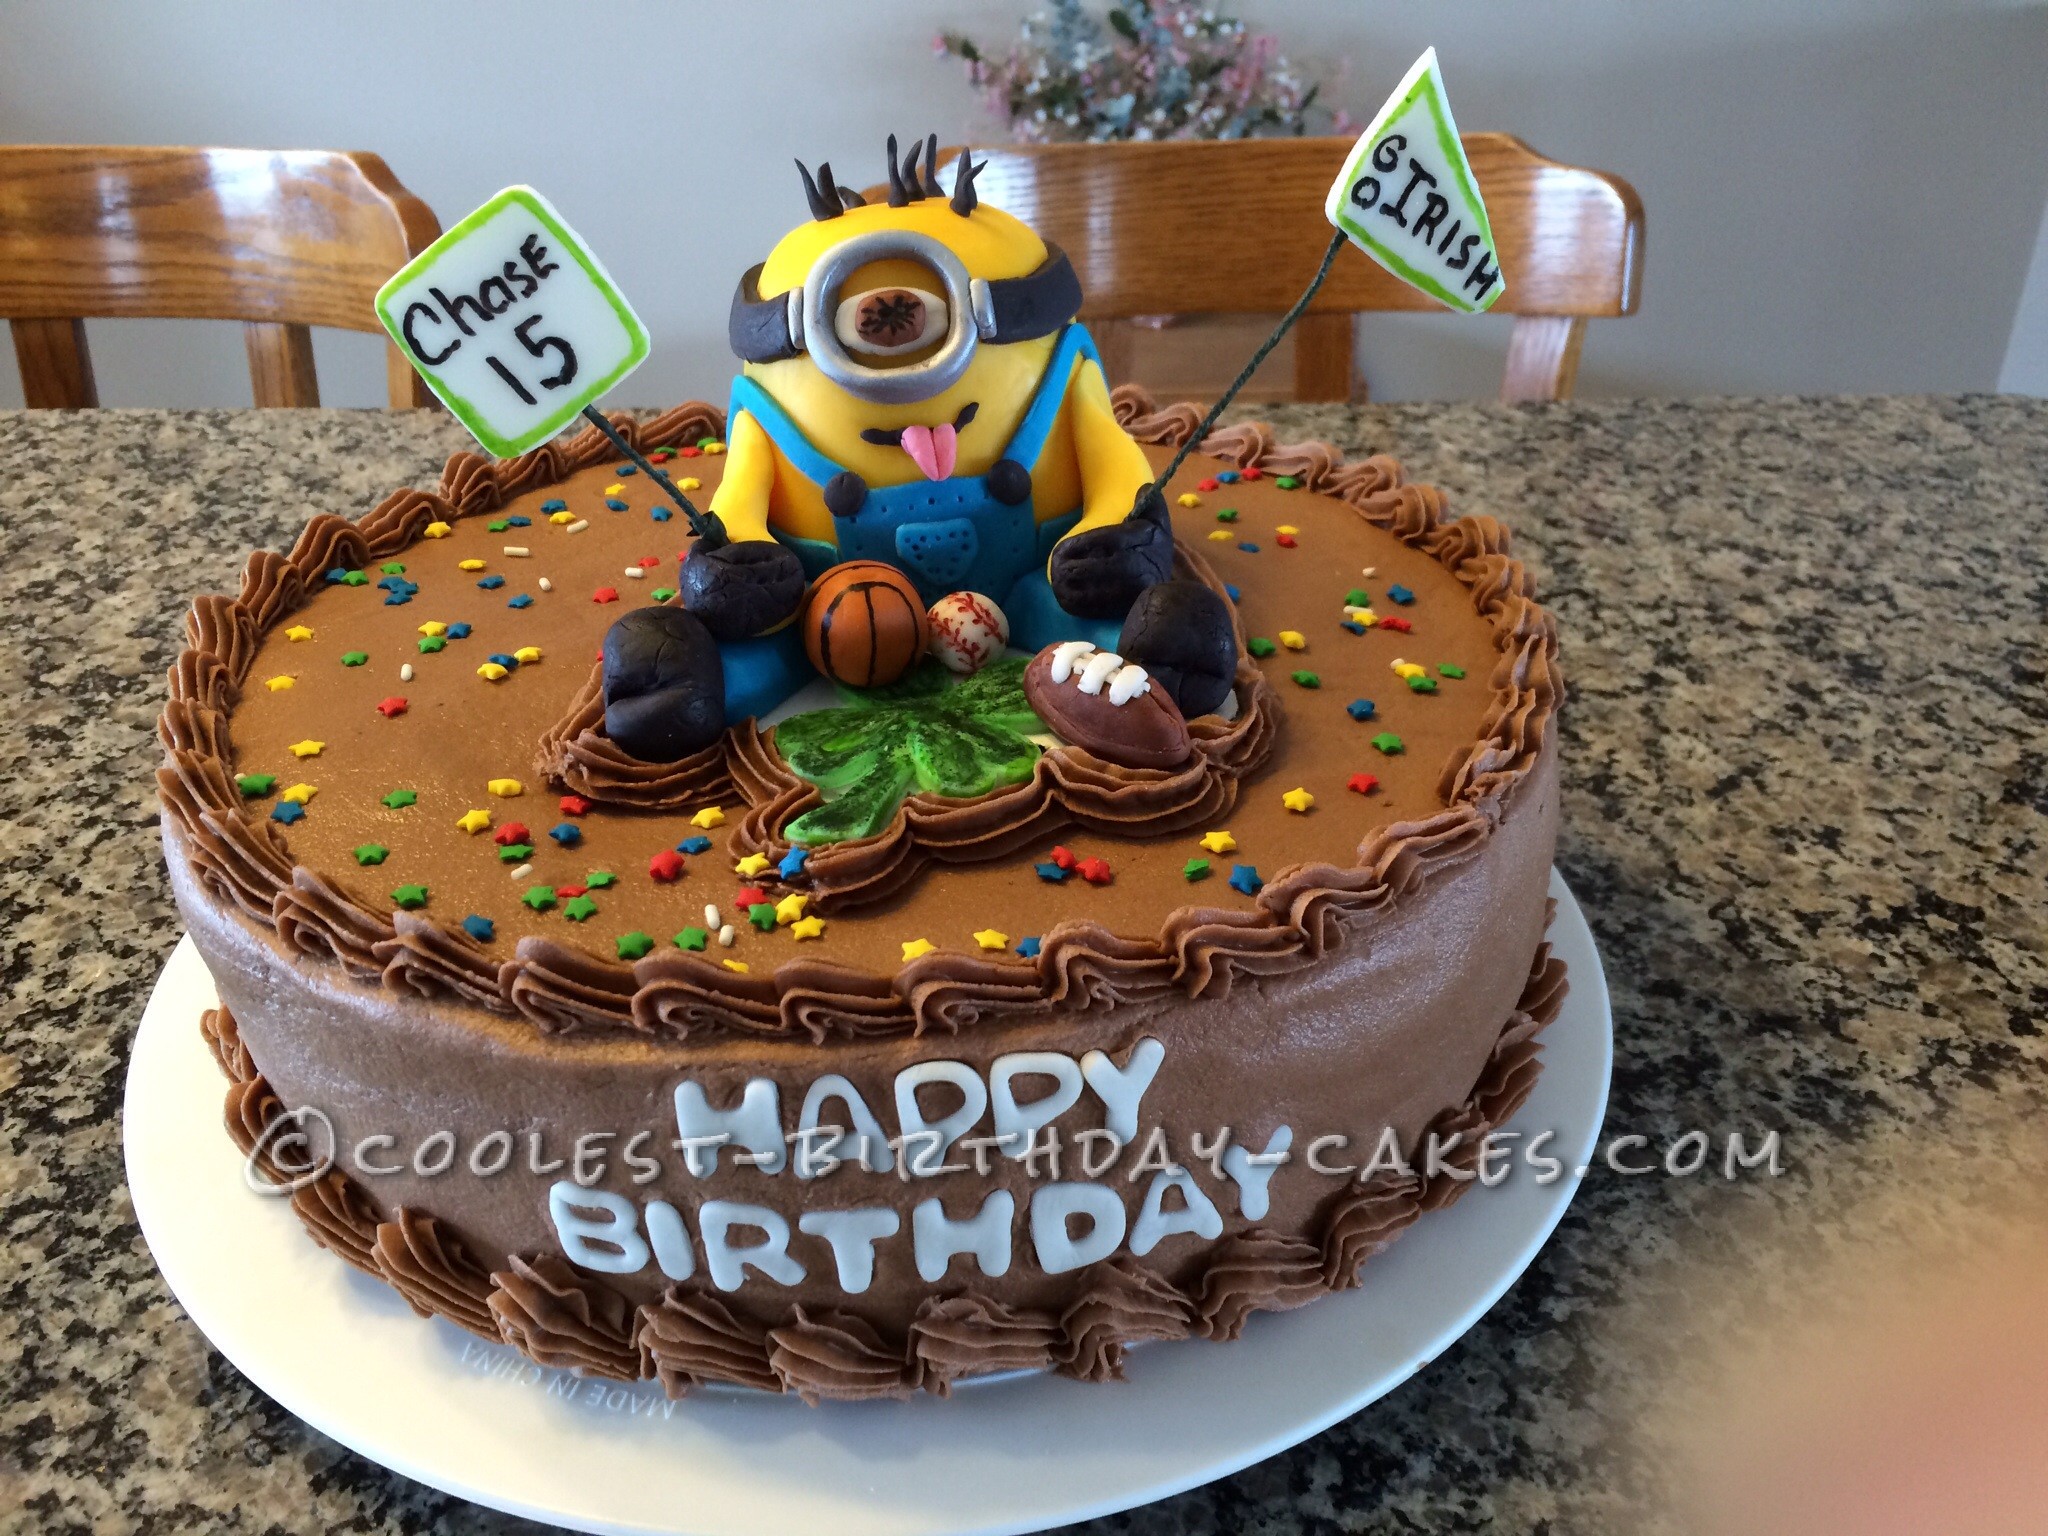 Cool Minion and Sports Cake